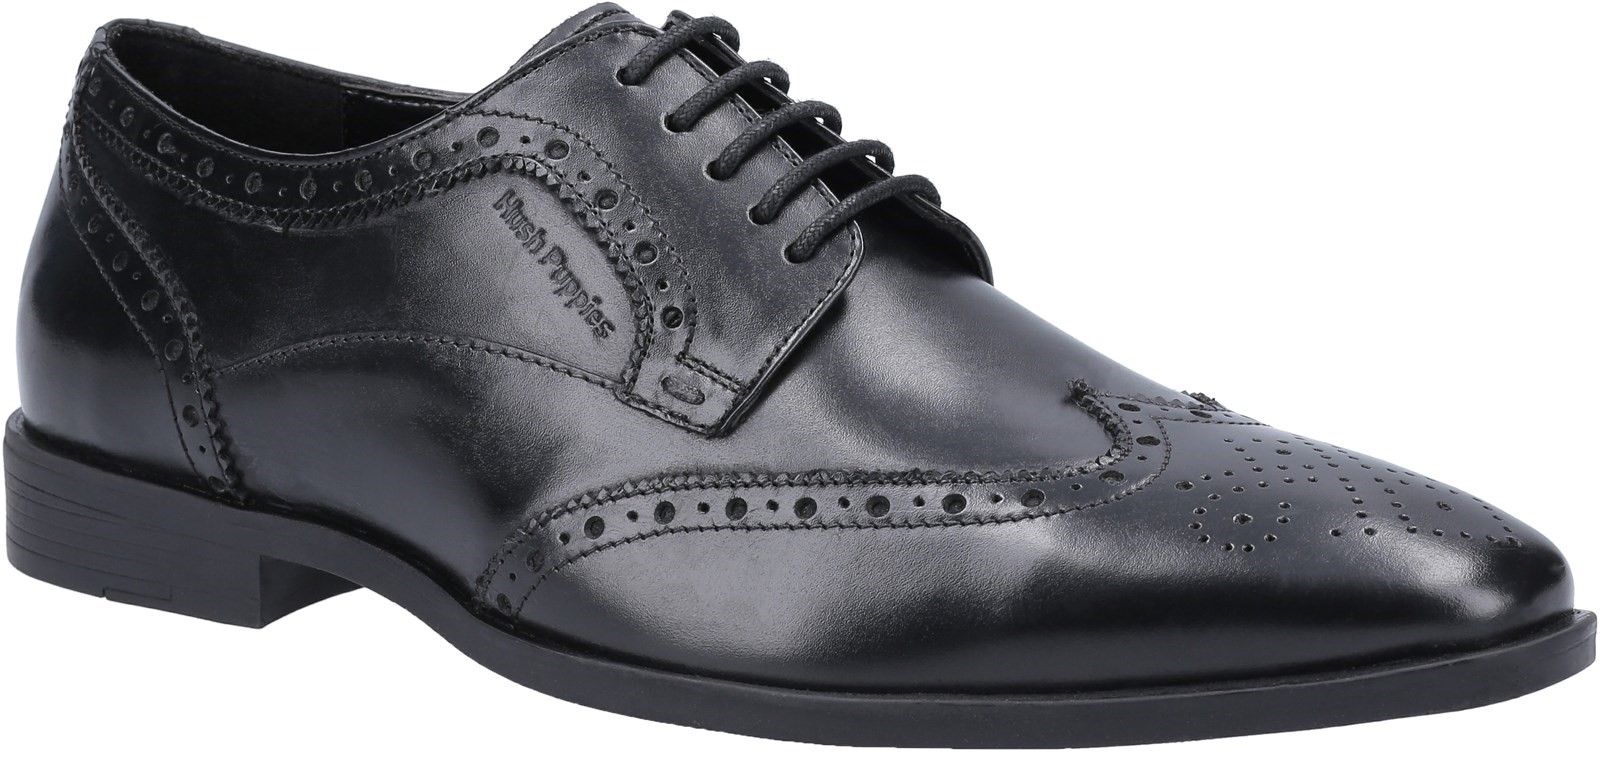 Classic lace up, wing-tip, Oxford Brogue shoe from Hush Puppies; Elliot Brogue is crafted with leather and has a memory foam footbed. The lightweight, flexible sole unit makes this the perfect smart footwear all day.Smart Leather Upper. 
Square toe. 
Hardwearing Rubber outsole. 
Memory Foam Sock. 
Classic Smart Brogue style.